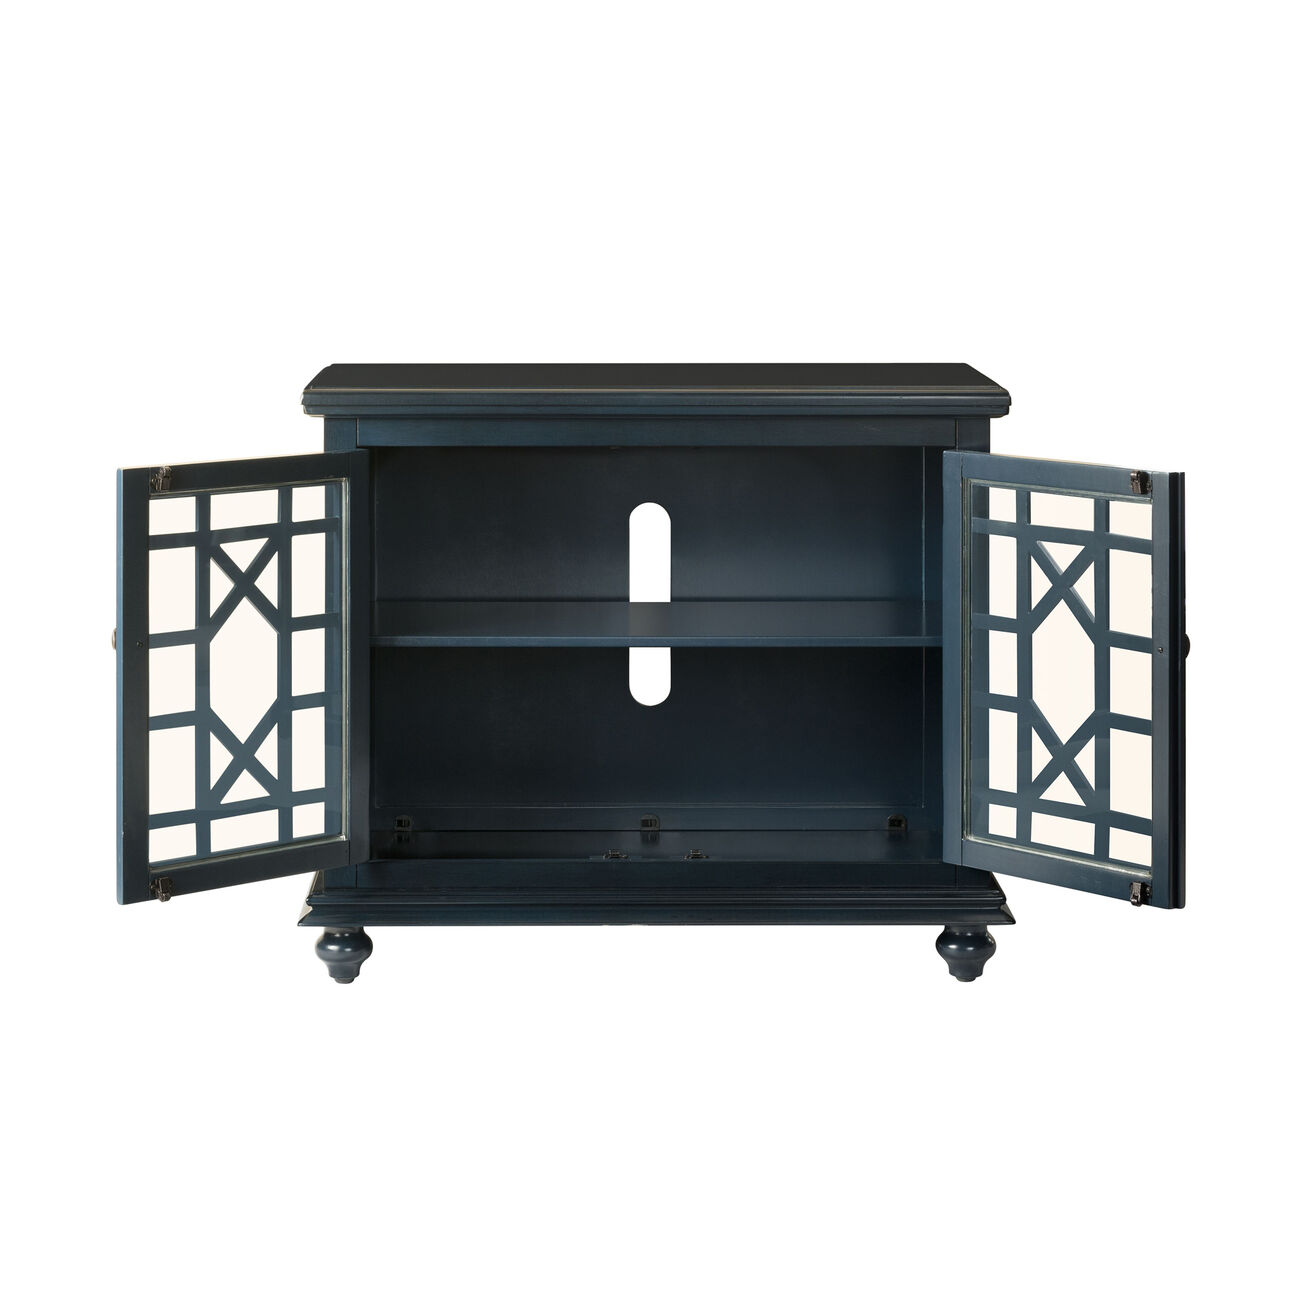 Transitional Wood and Glass TV Stand with Trellis Cabinet Front, Dark Blue